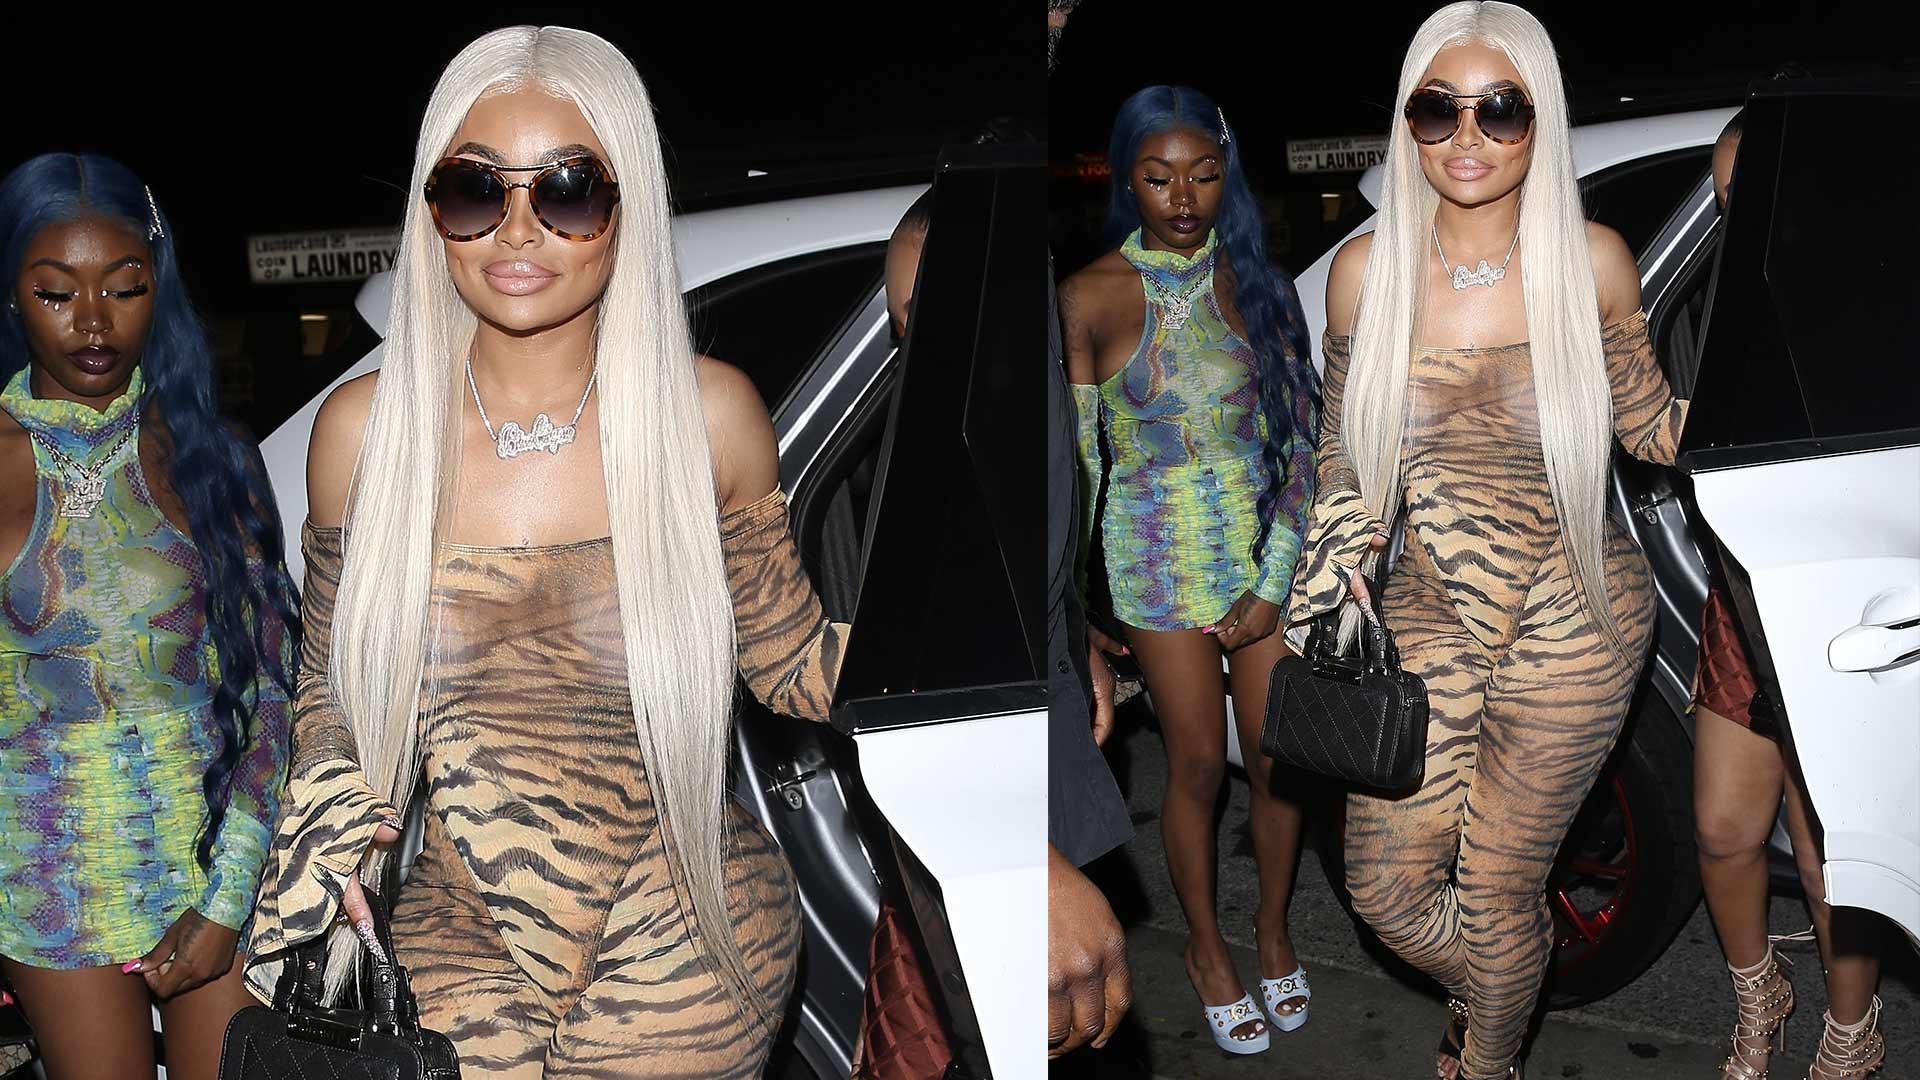 Blac Chyna Makes Bold Statement in Tiger Bodysuit Ahead of Explosive Reality Show Premiere